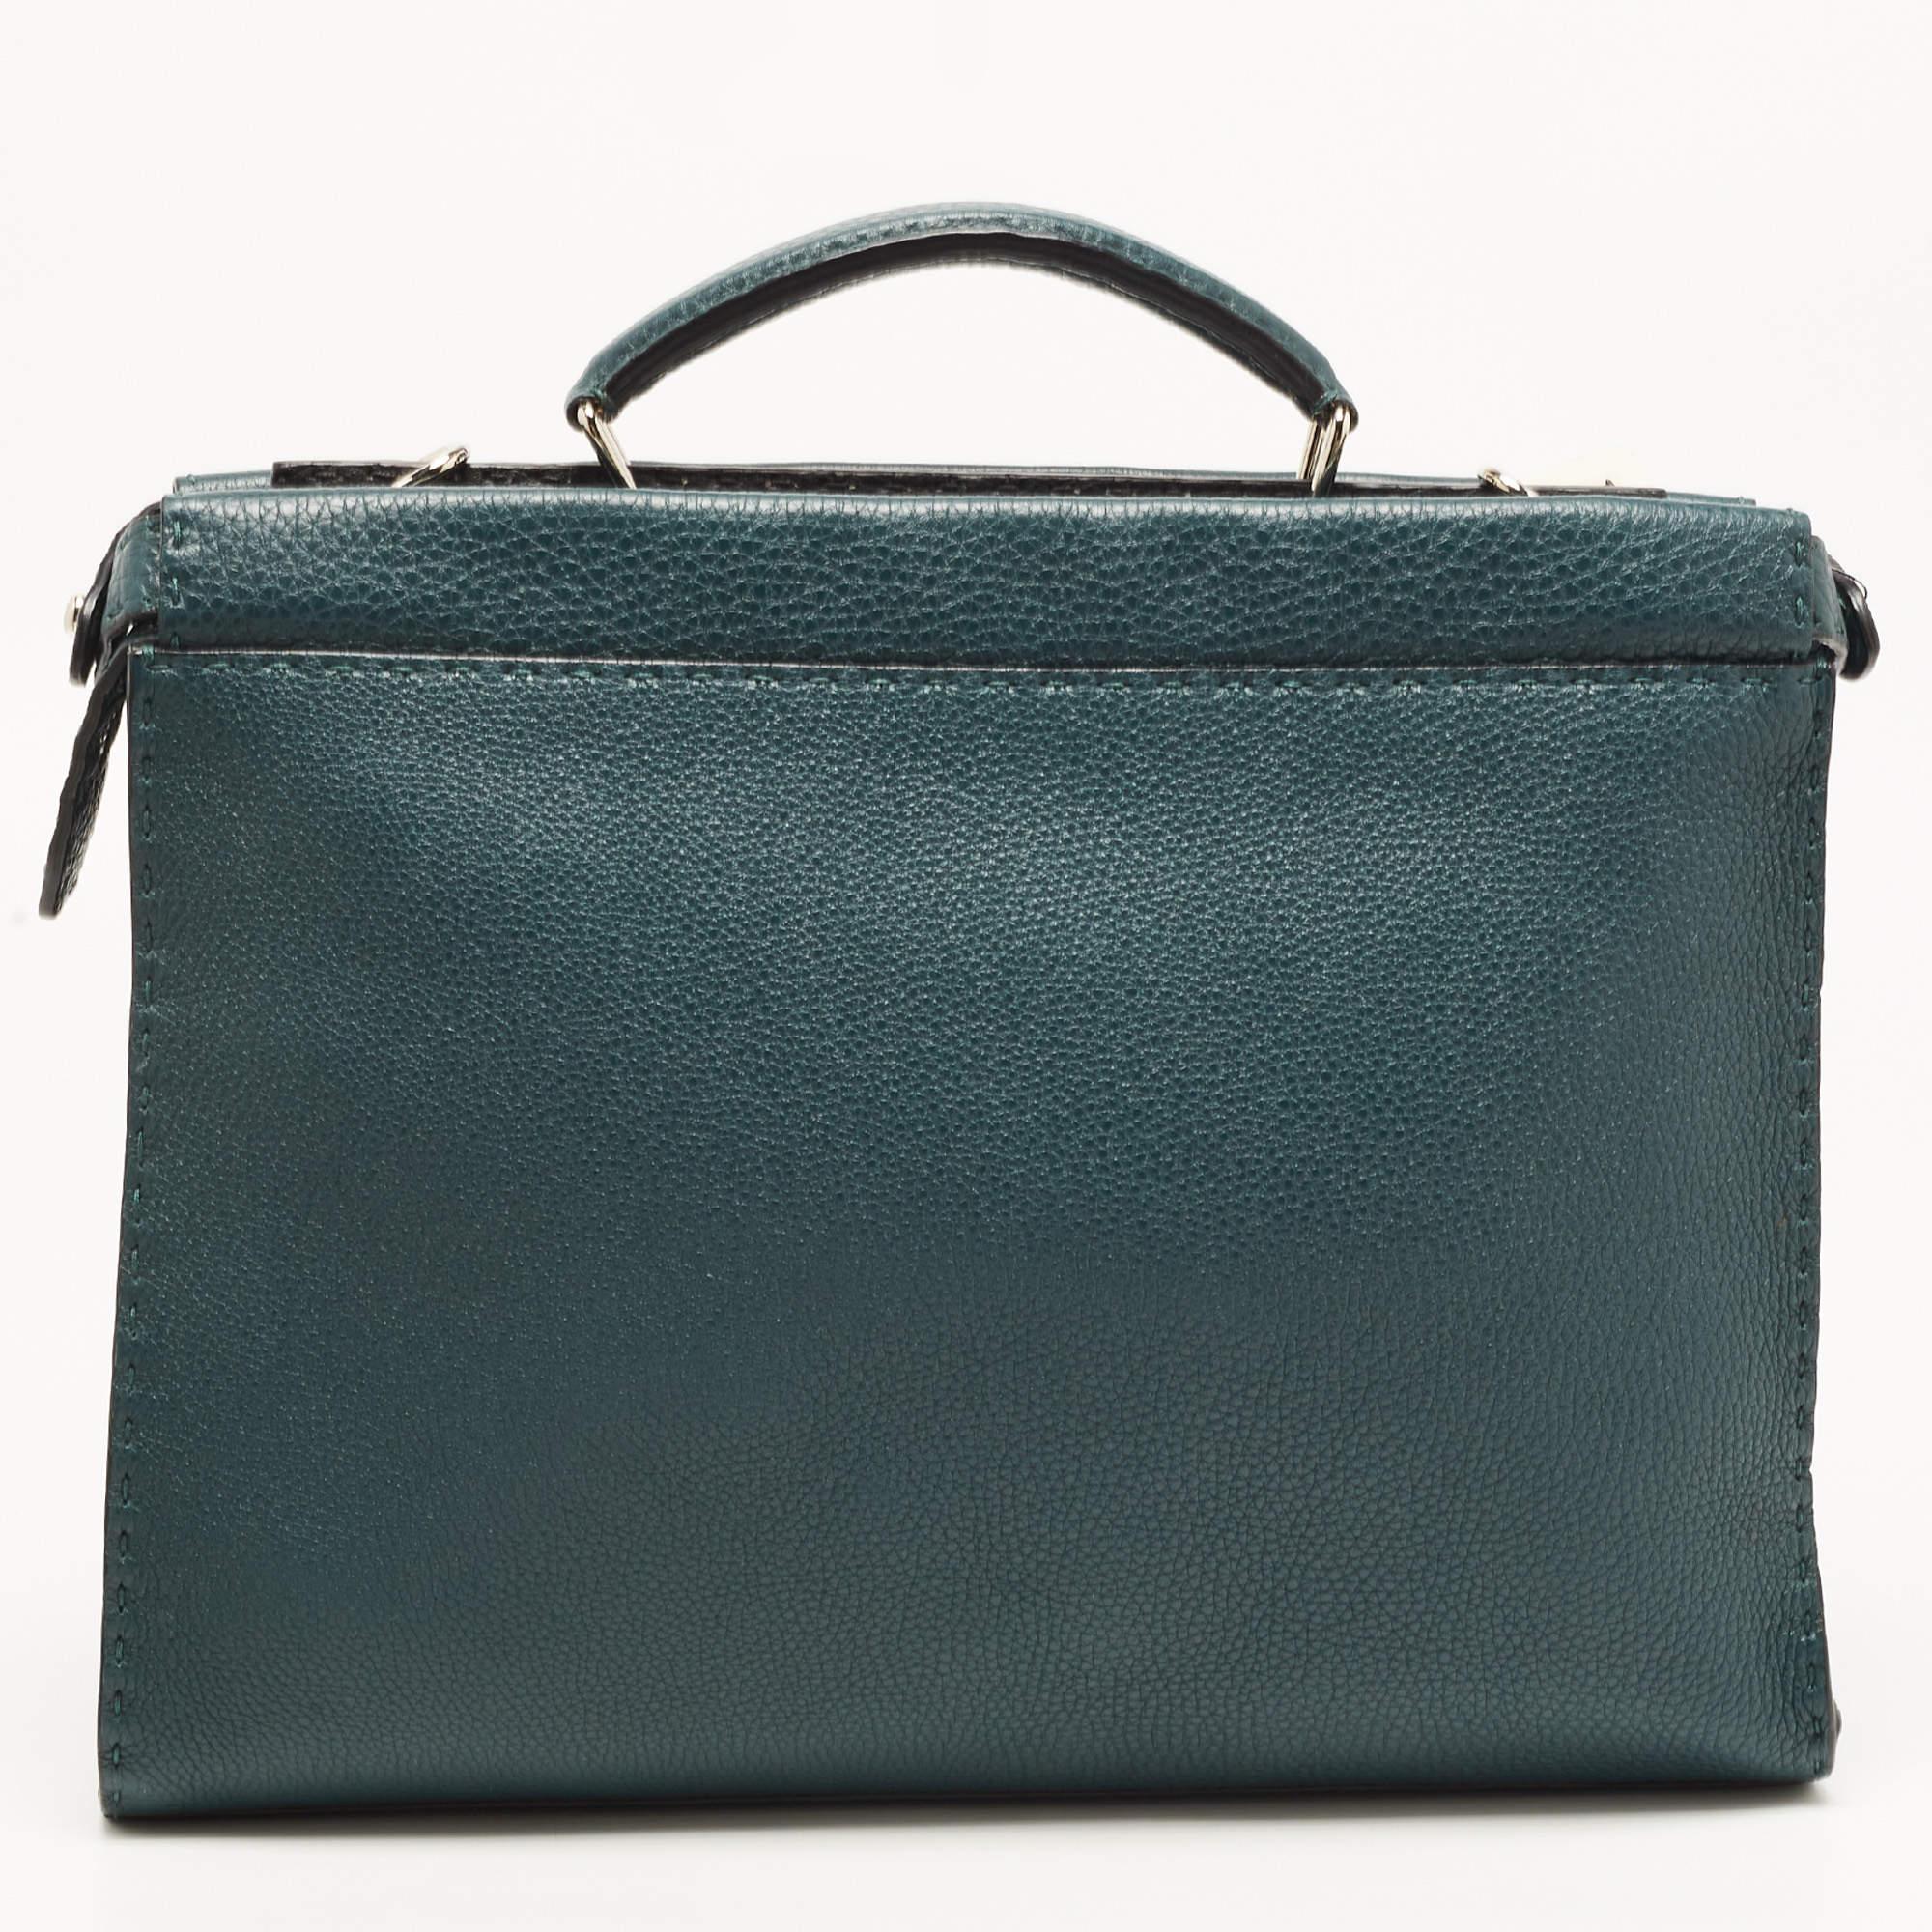 Perfect for housing your documents and other work essentials, this briefcase will make an elegant choice. Crafted with function in mind, this bag features a central capacious interior.

Includes: Original Dustbag, Detachable Strap, Rain Cover, Info